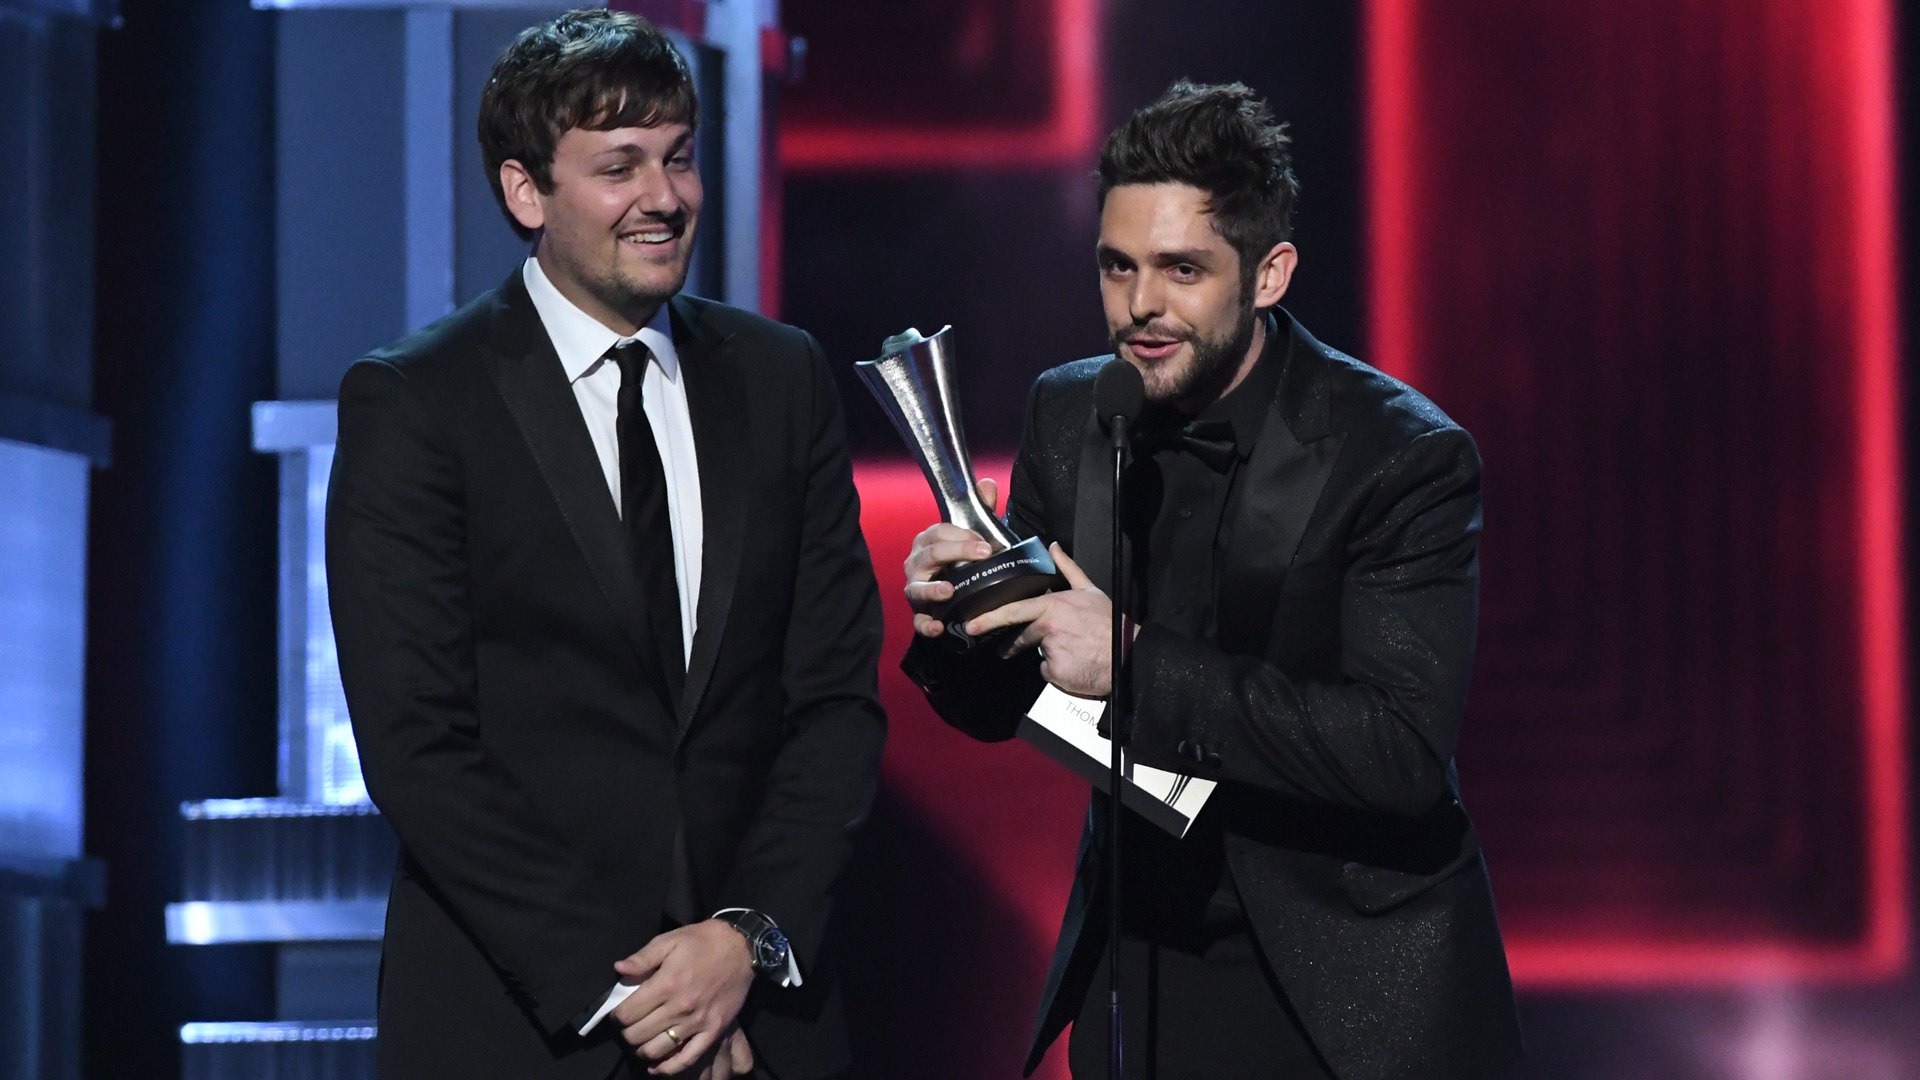 Thomas Rhett wins Song Of The Year at the 52nd ACM Awards